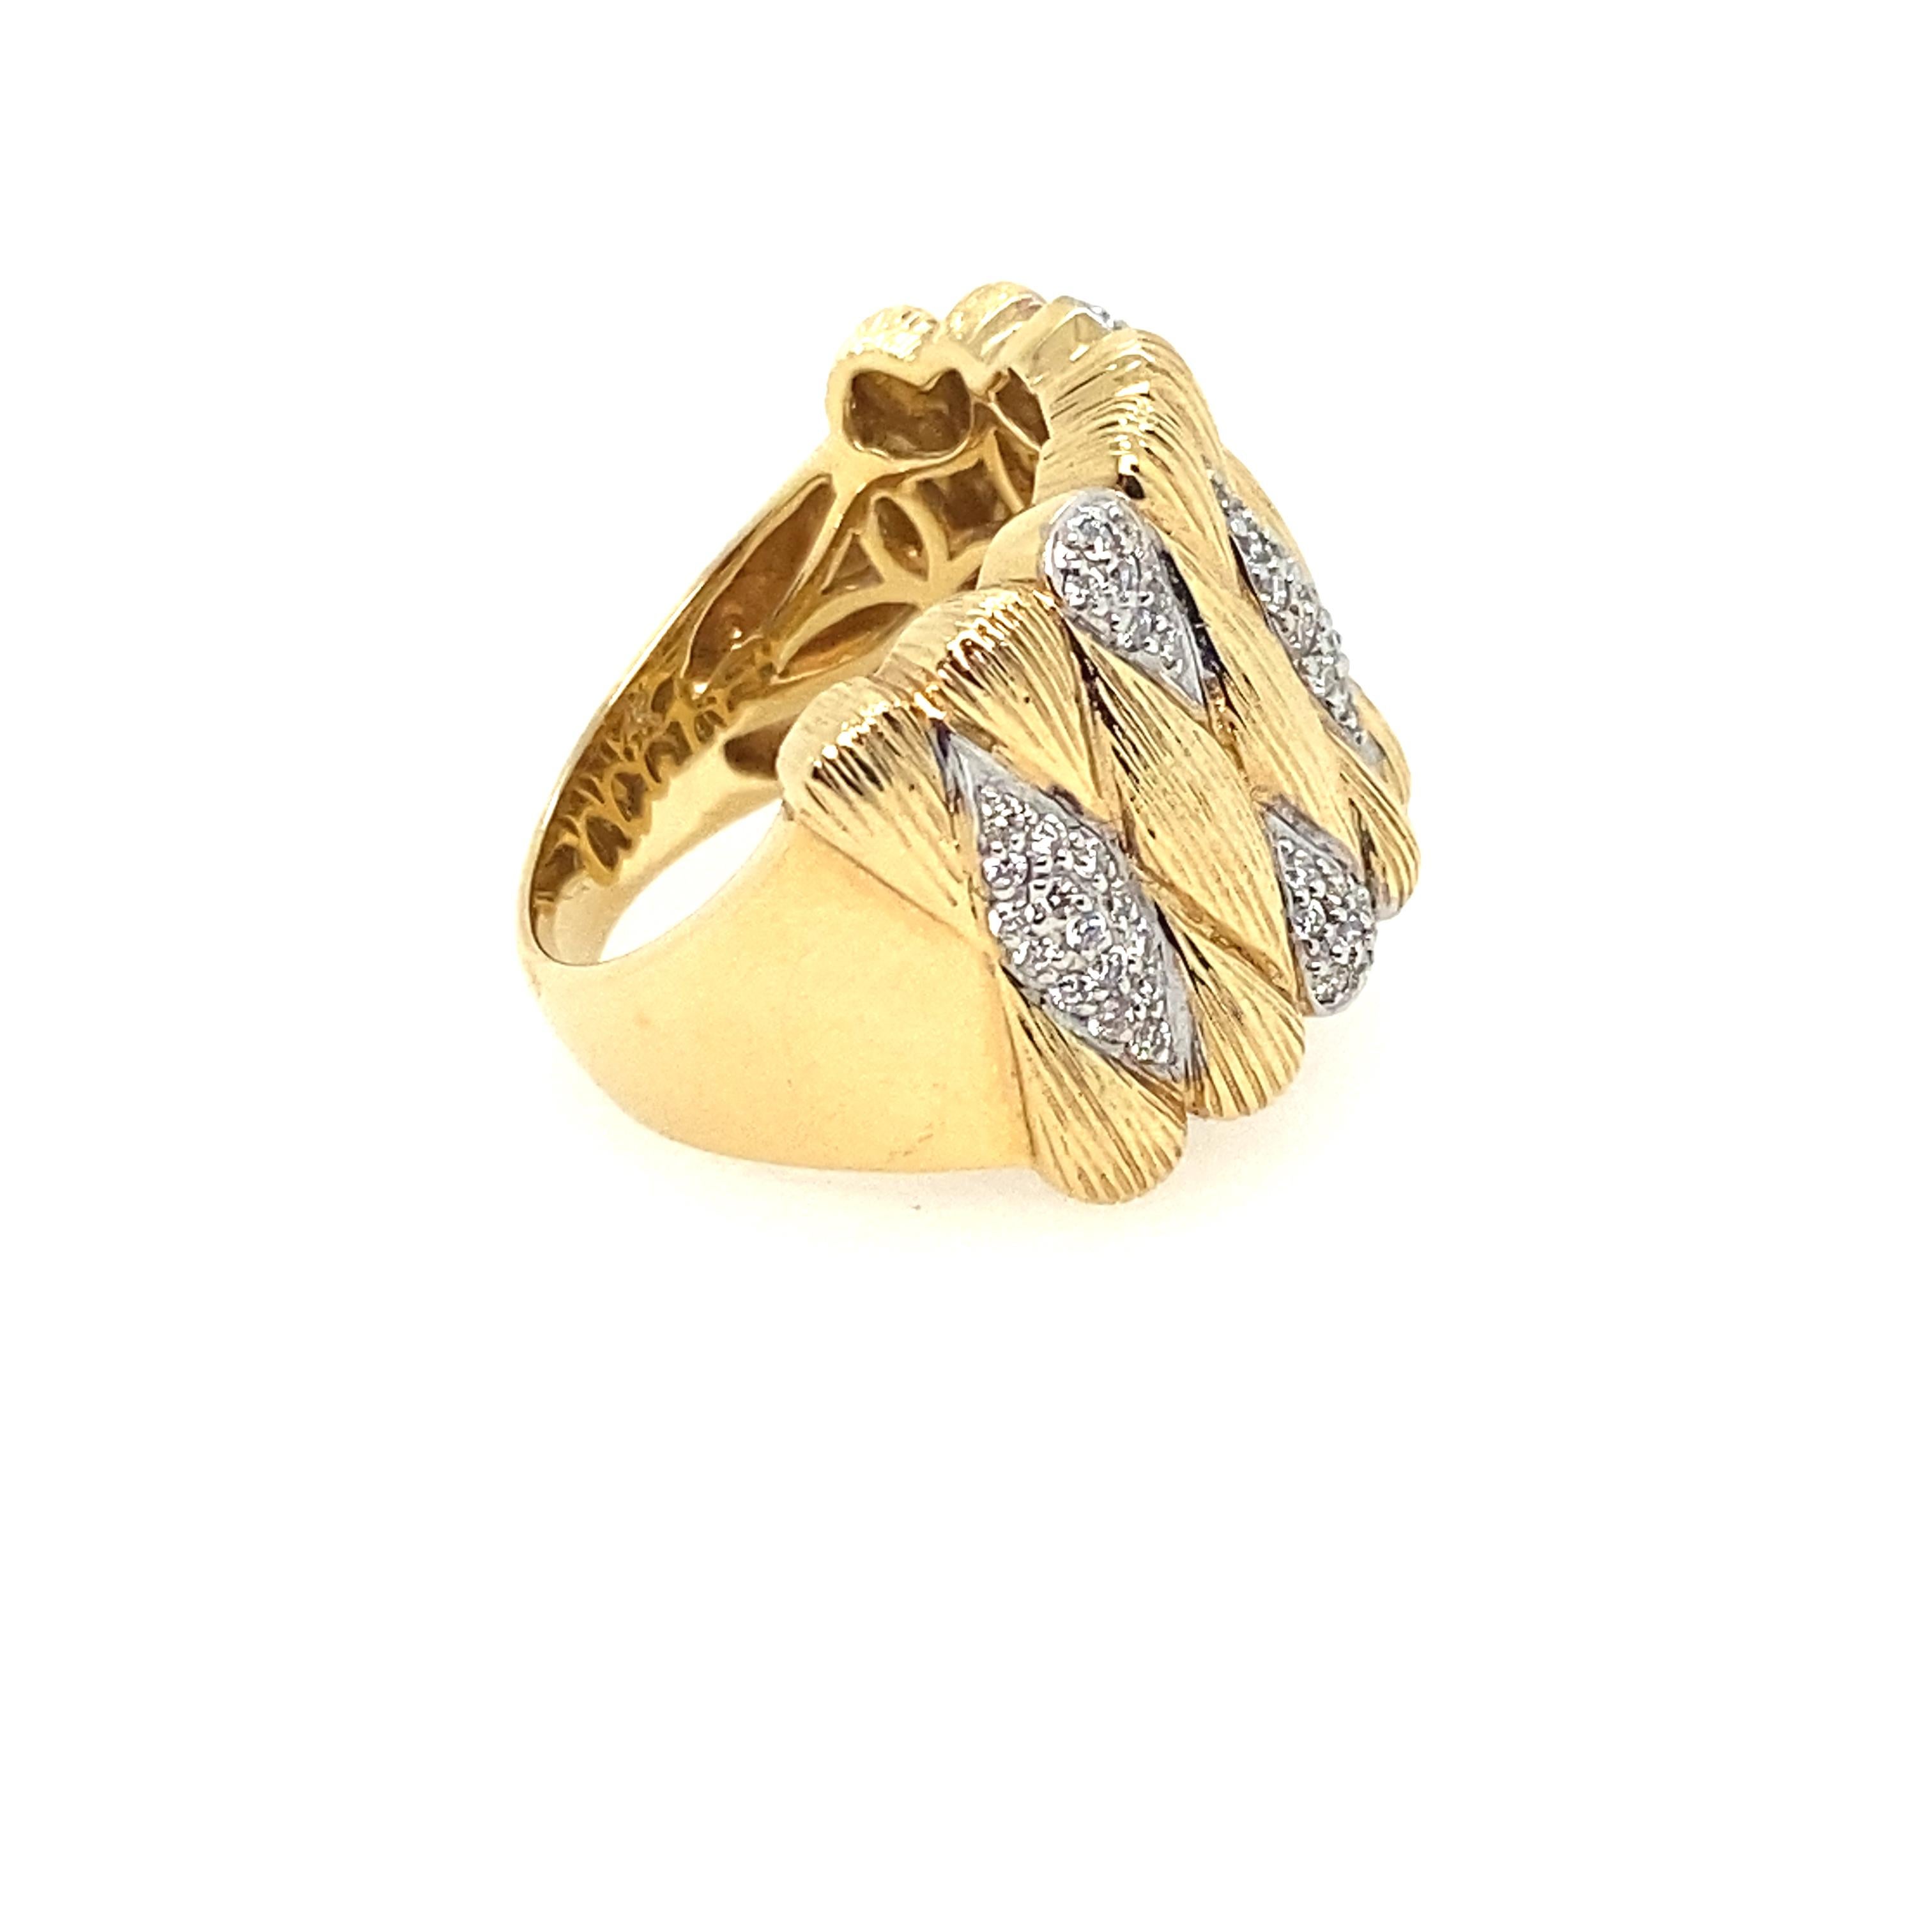 Wide Gold Band Ring with diamonds.  This chic wide band ring is a stunner!  With the beautiful 14kt yellow textured gold and quilted look with pave diamonds.  A style that will last forever.  It is size 7.5.  it can be sized down, or worn as a great